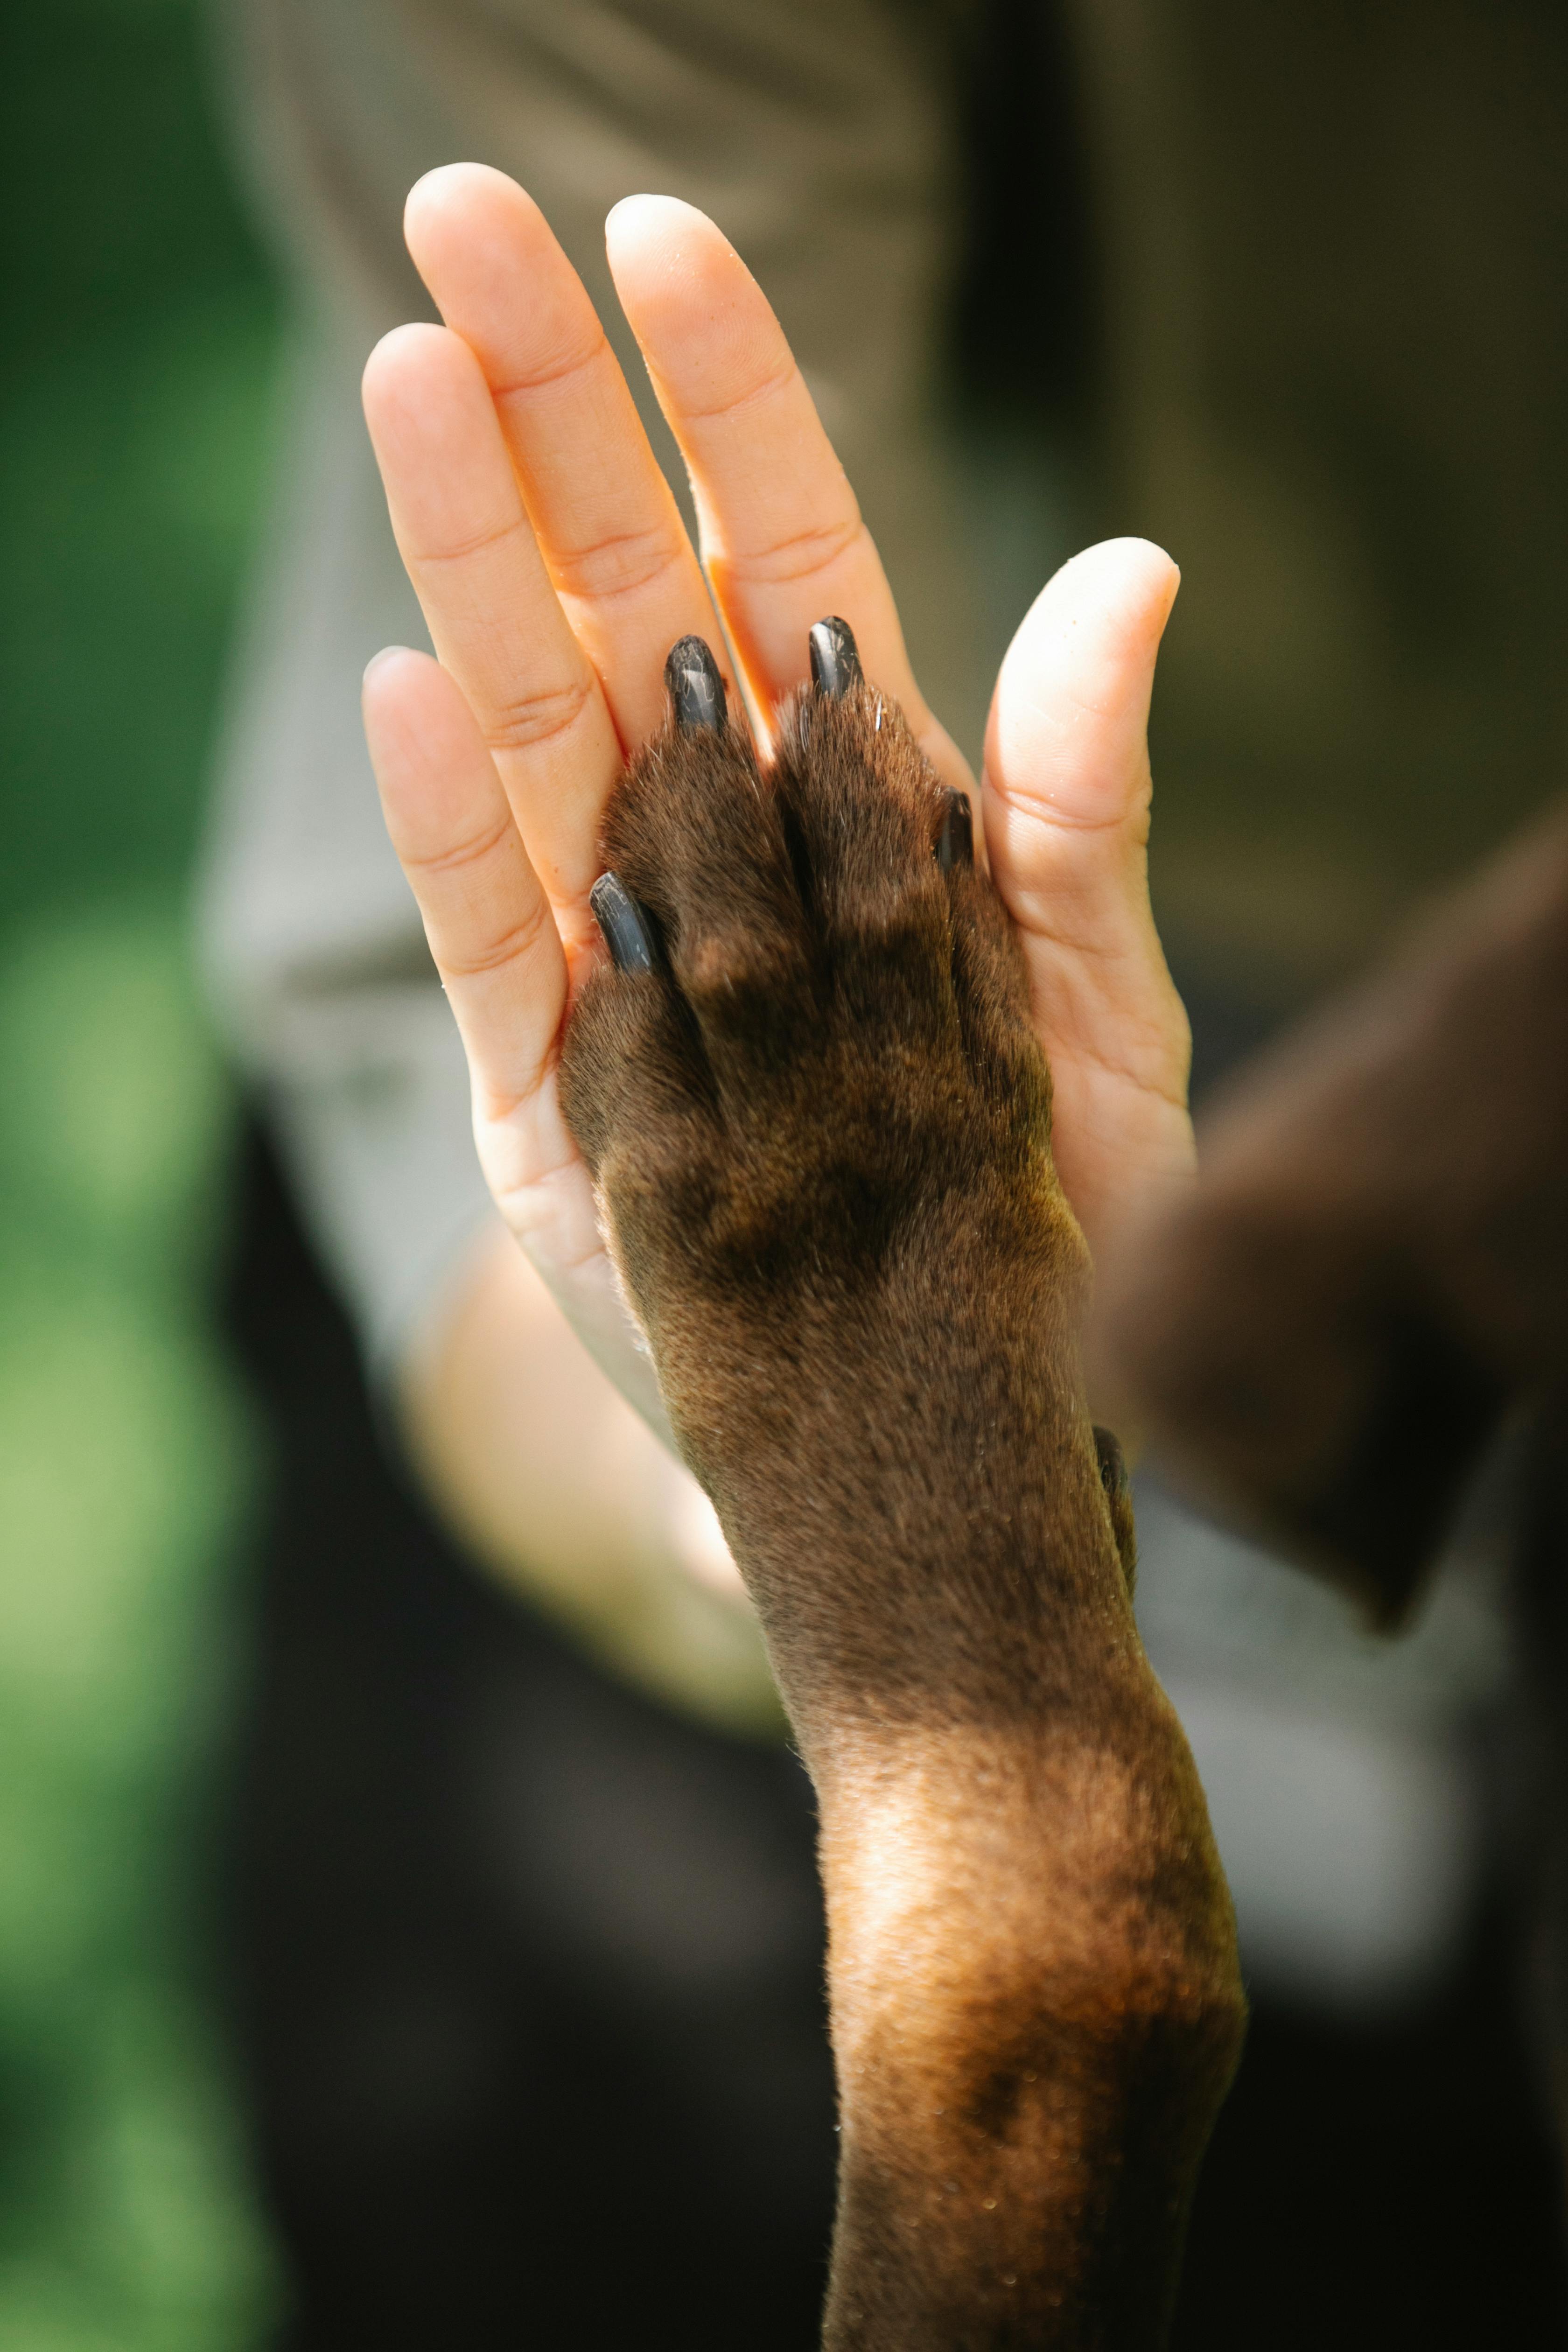 High Five Photos, Download The BEST Free High Five Stock Photos & HD Images